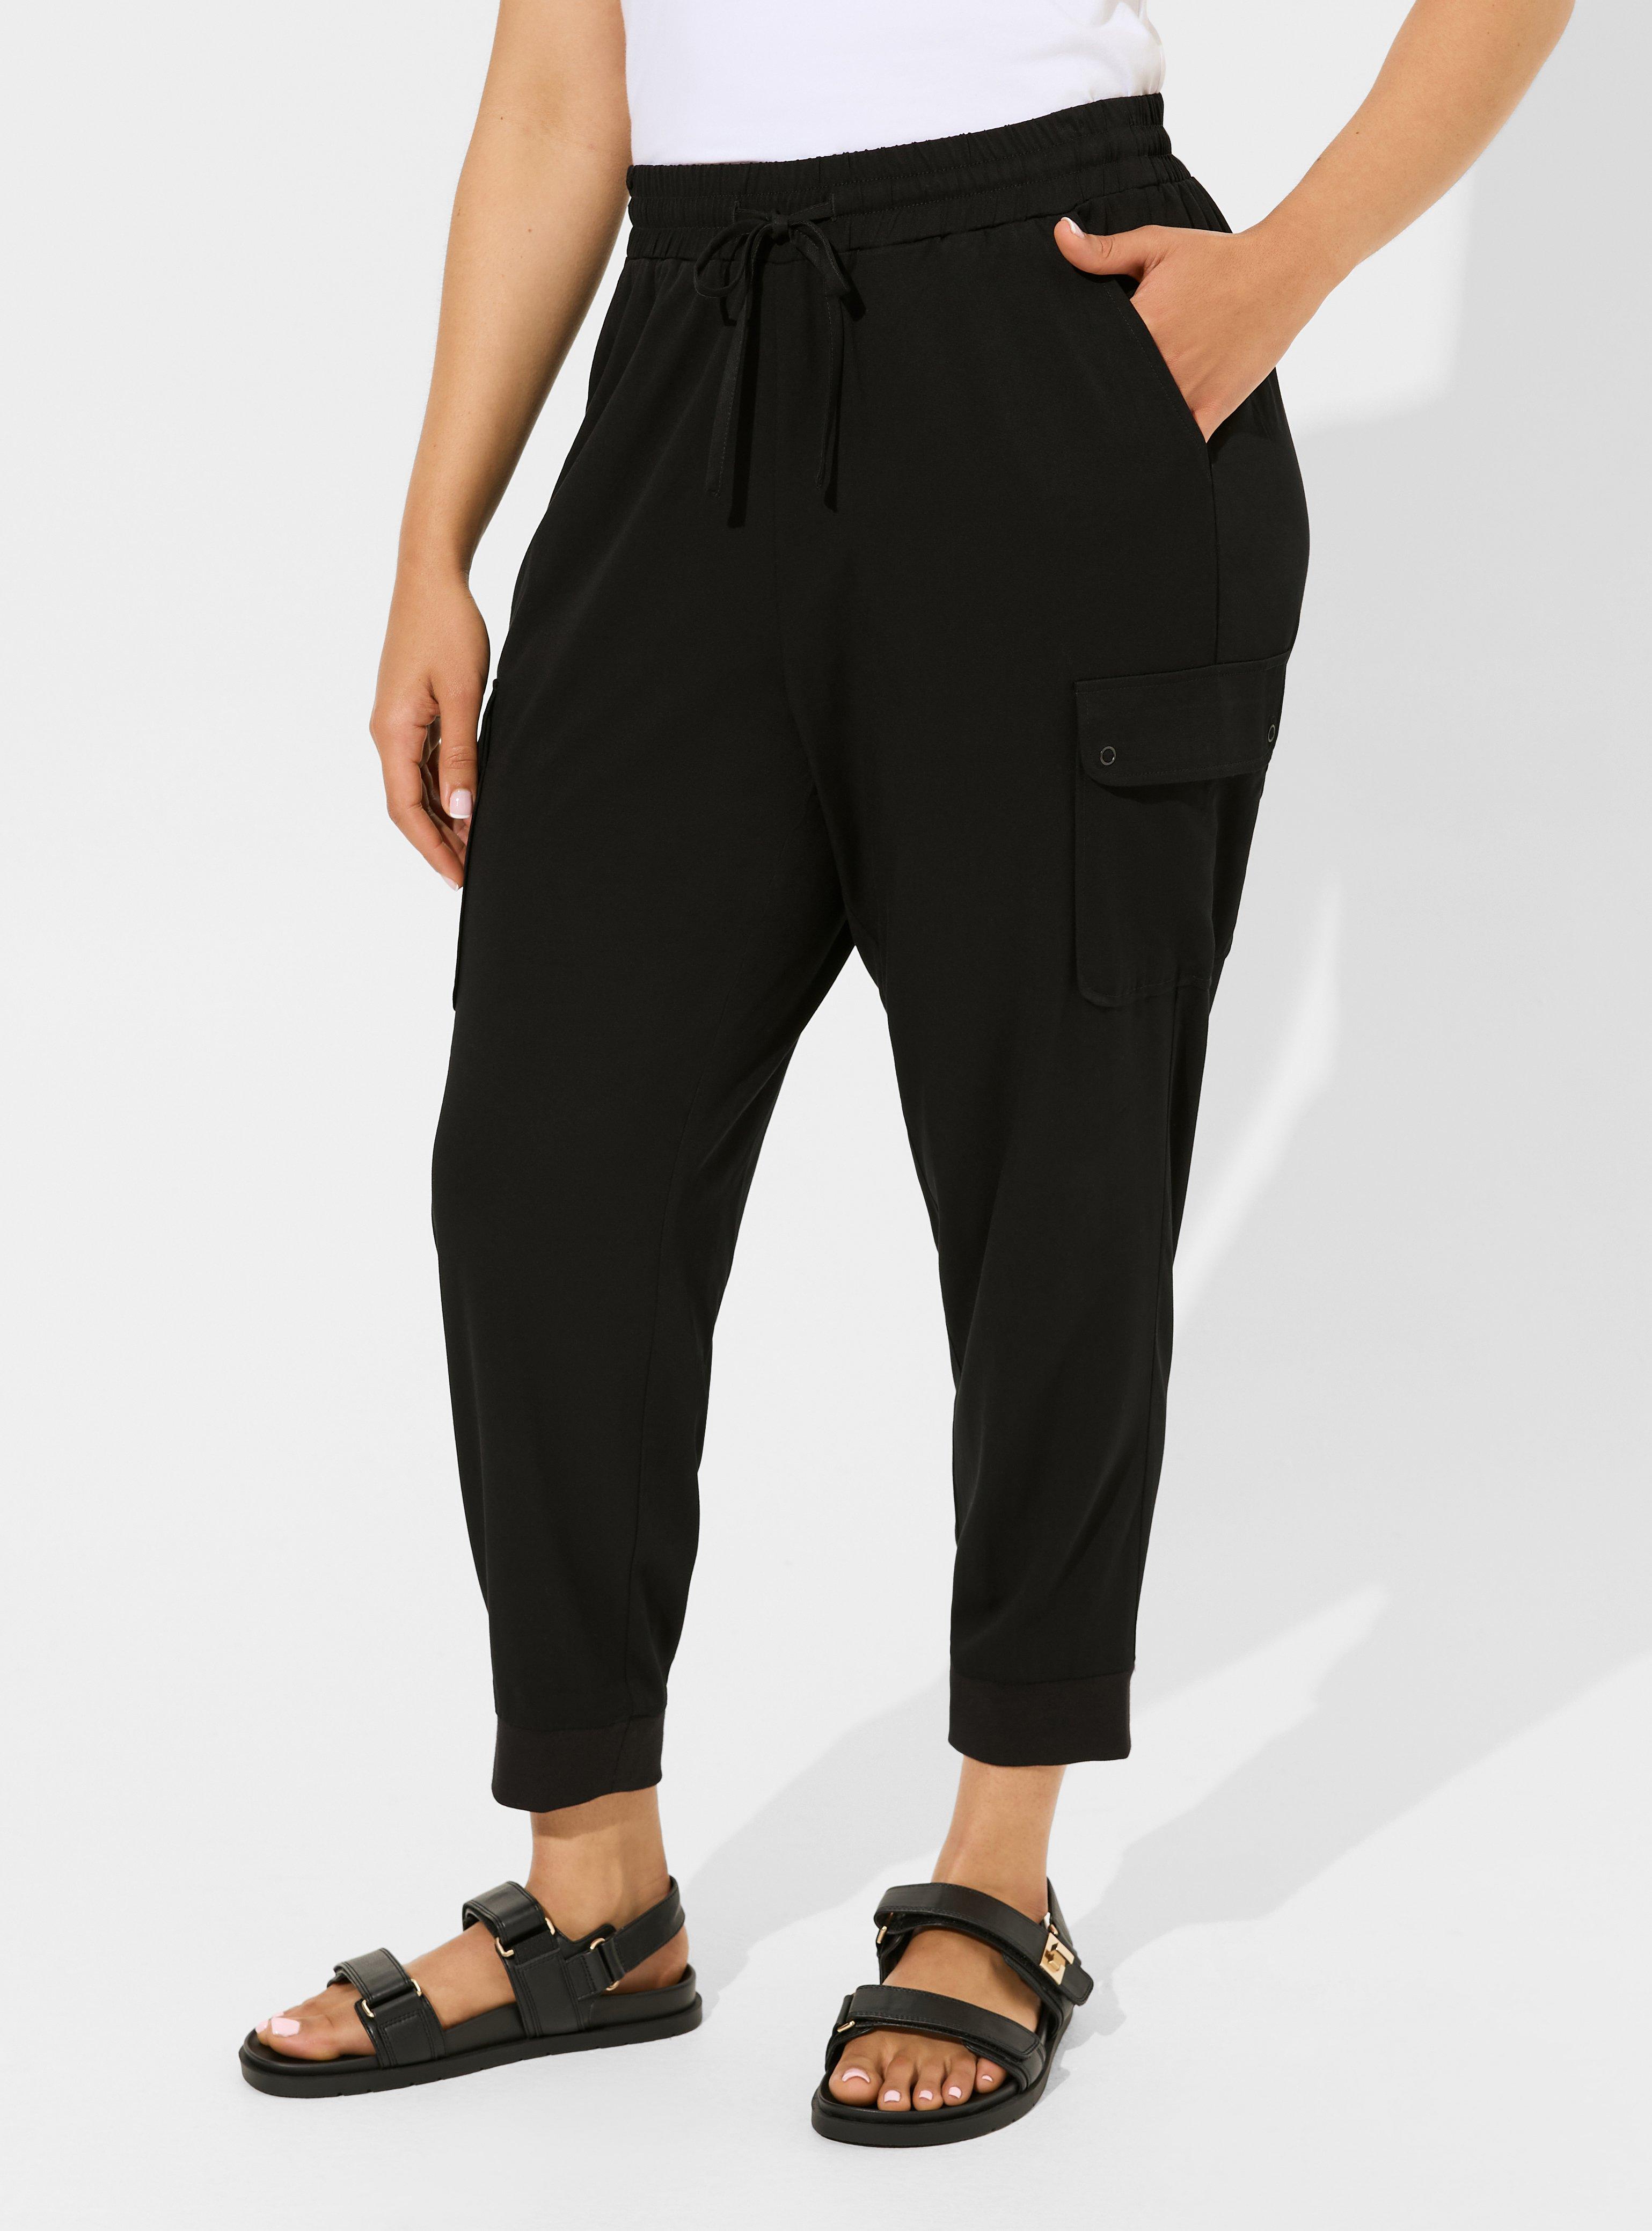 4-Way Stretch Mid-Rise Cargo Pant - 28